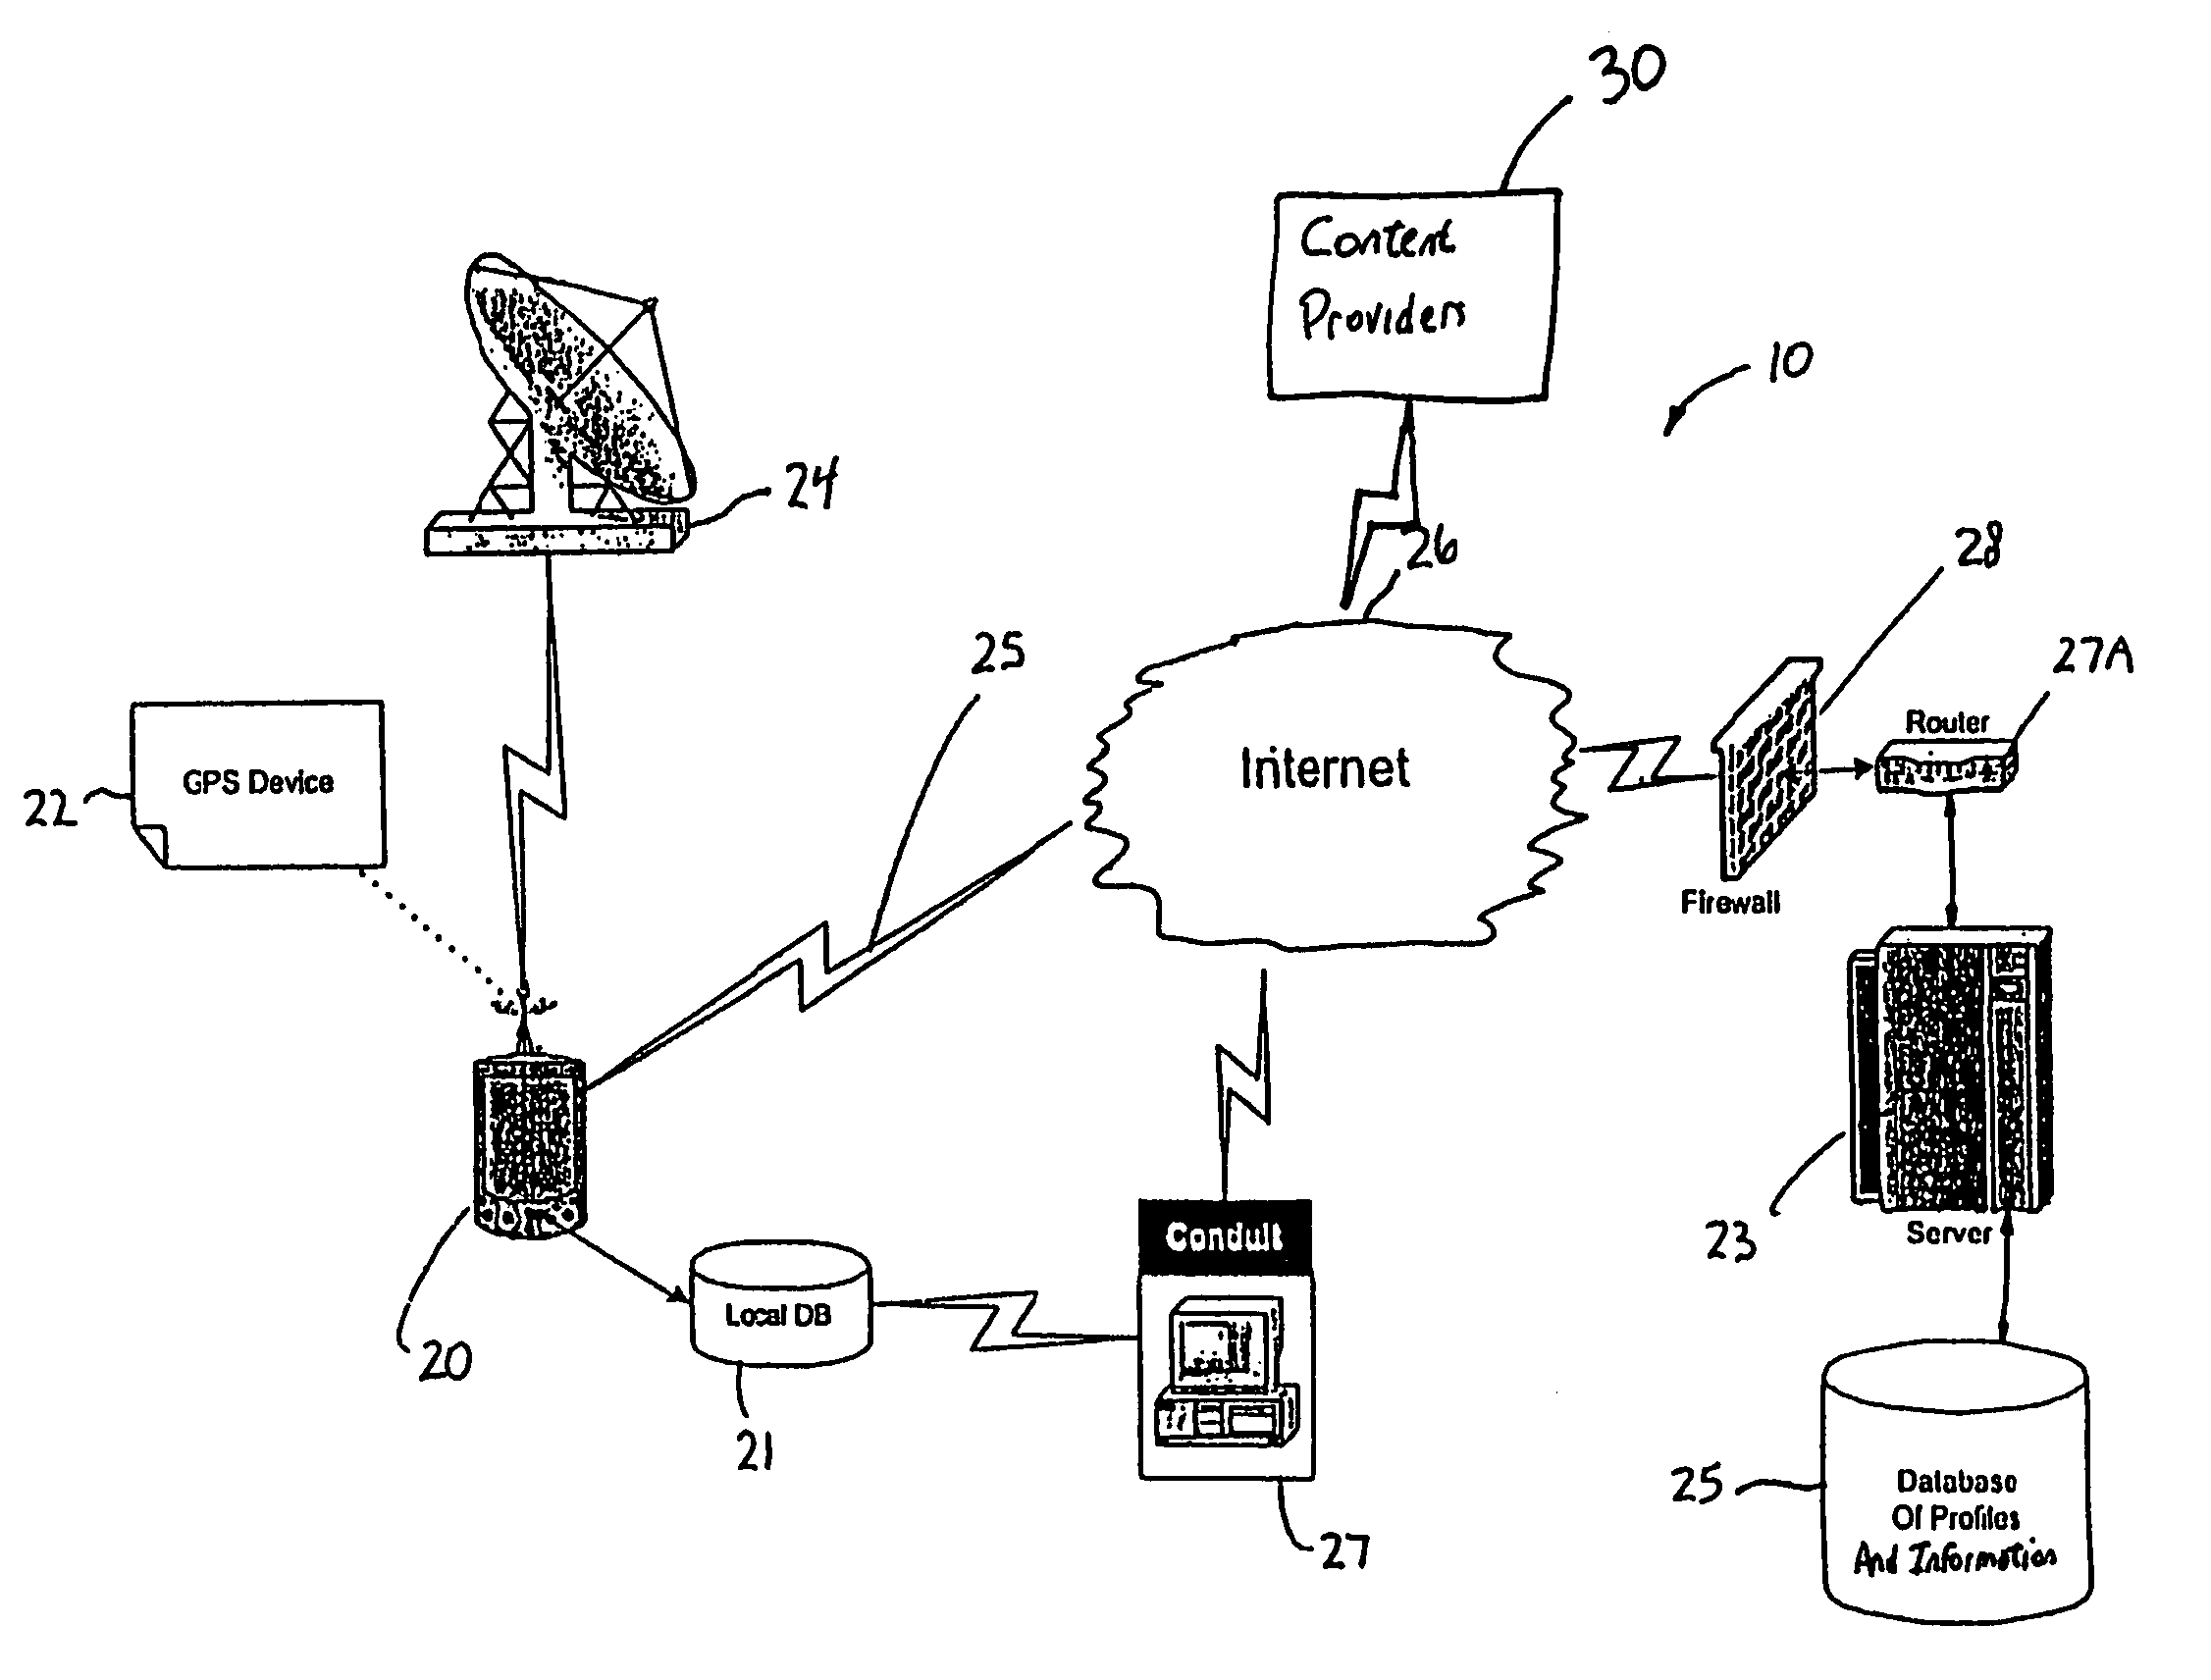 System and method for providing location-based information to mobile consumers